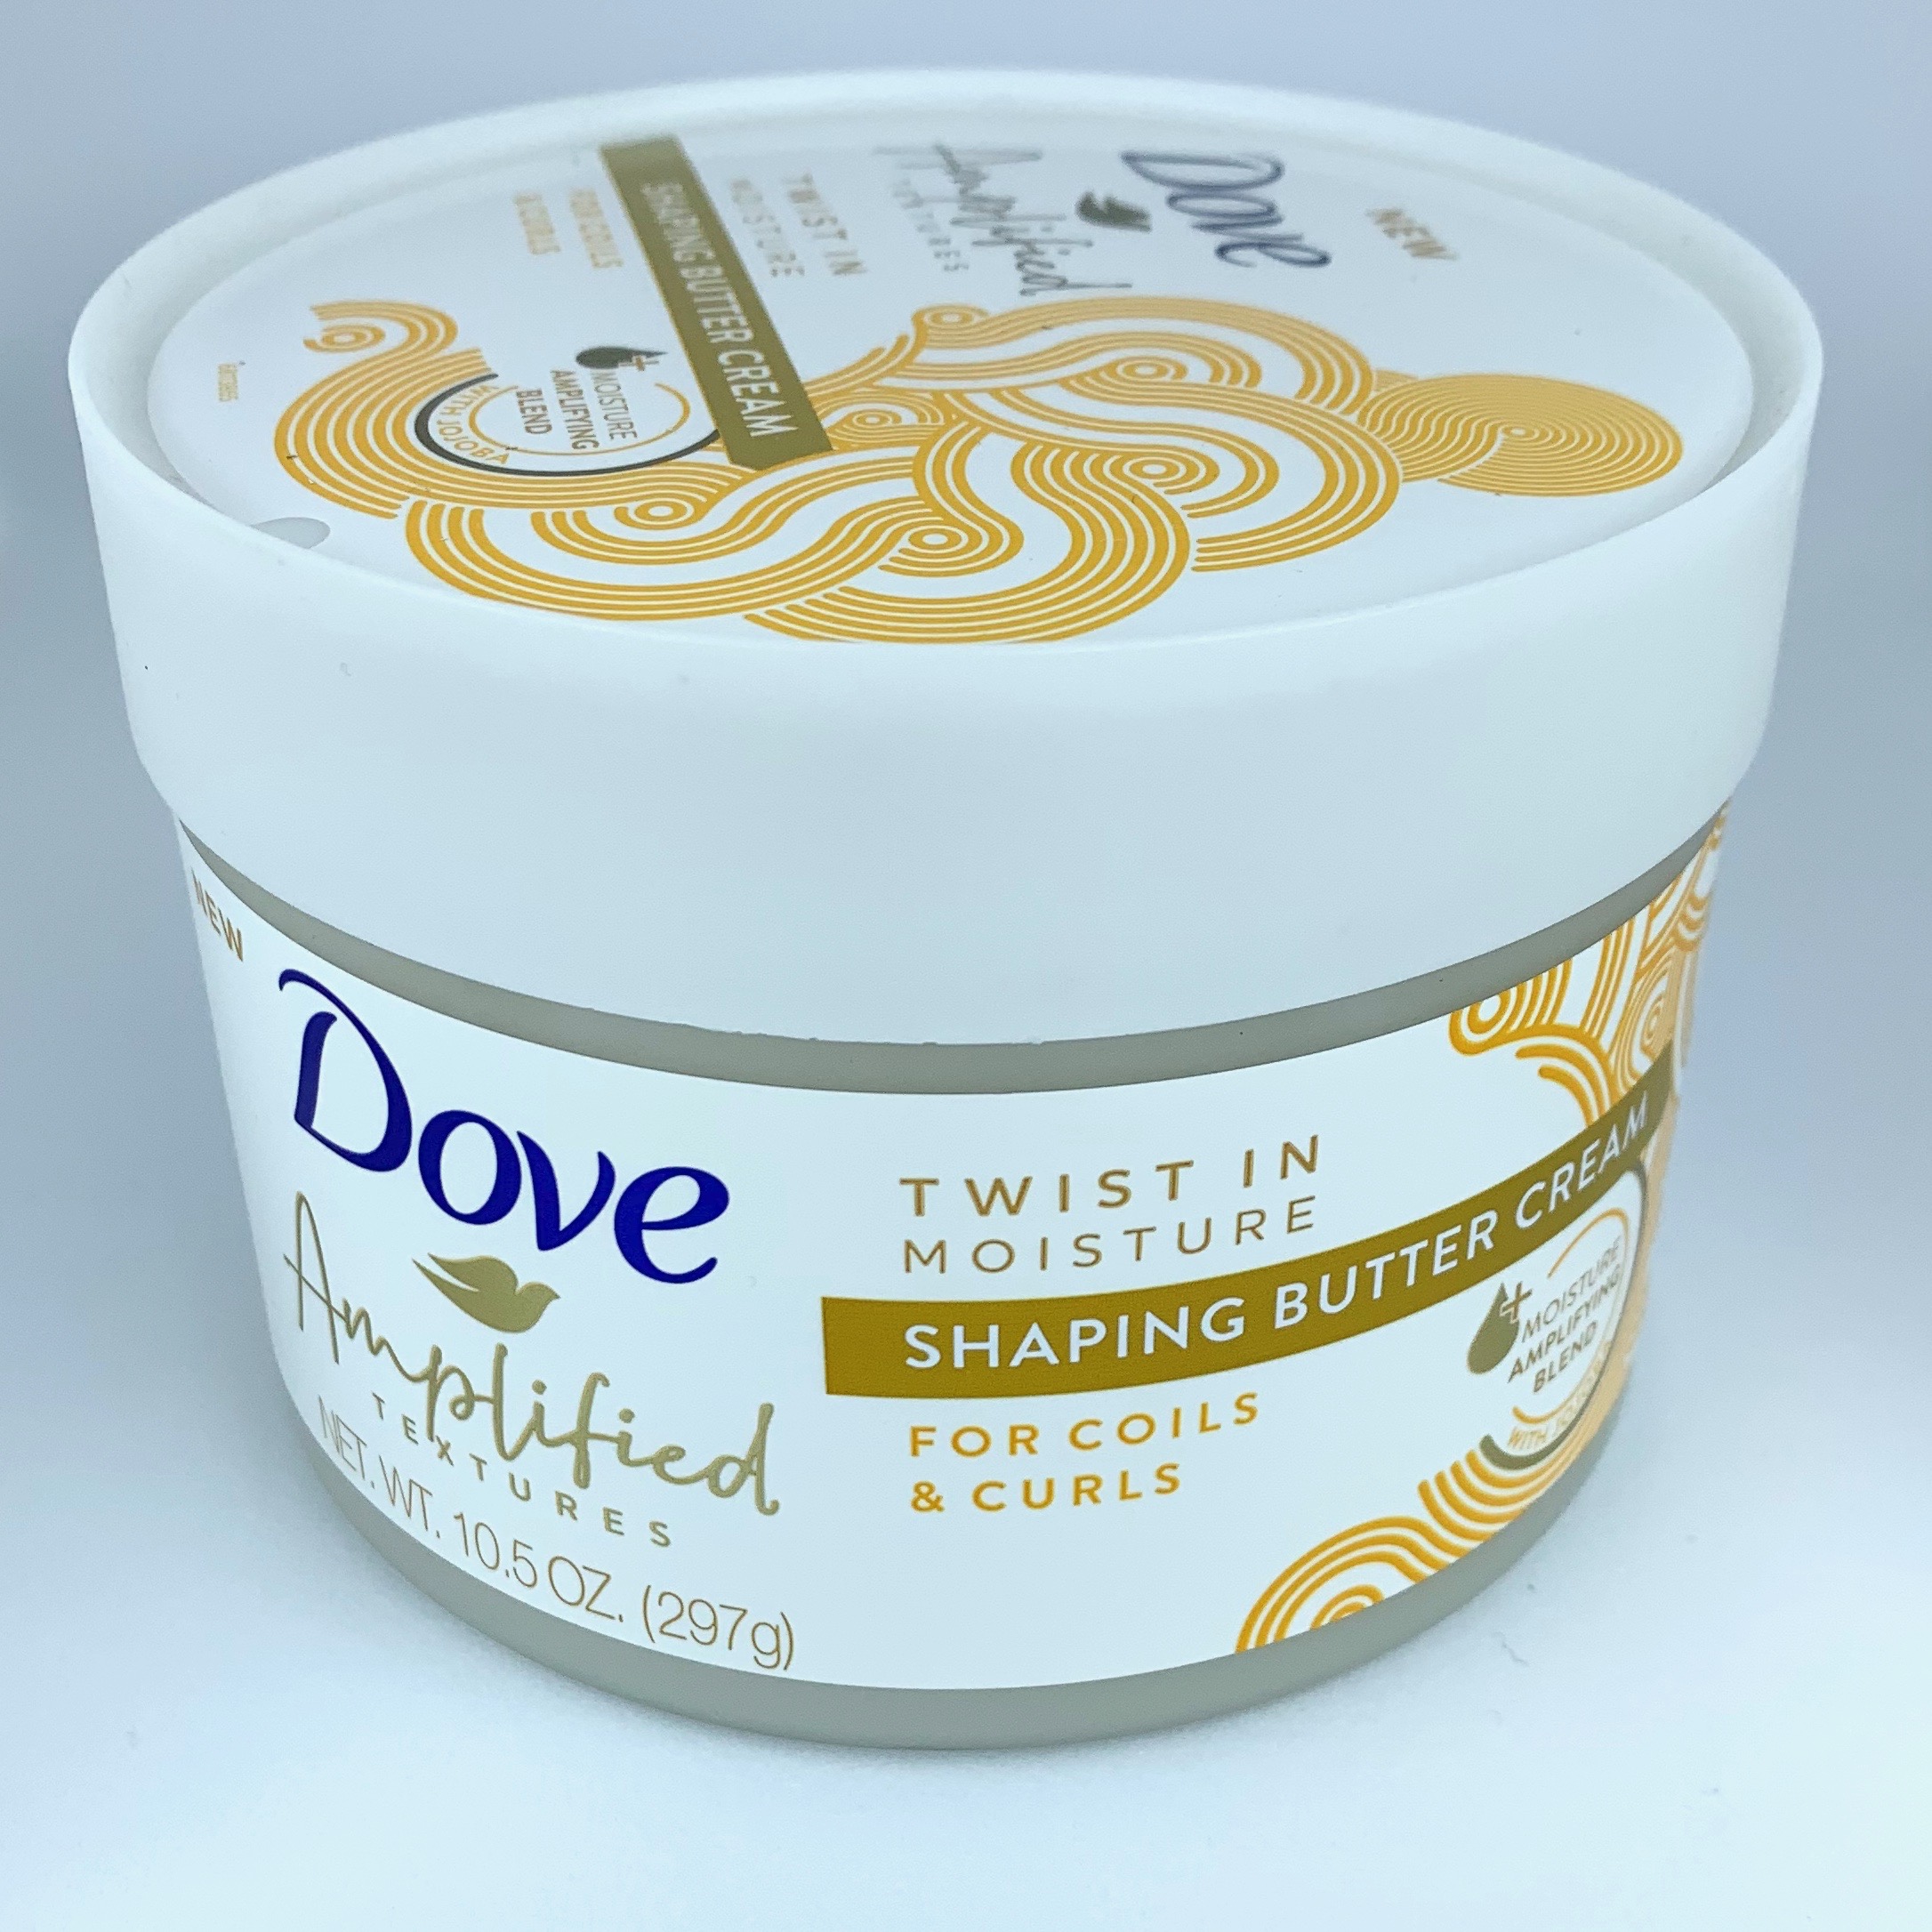 Dove Amplified Textures Twist-In Moisture Shaping Butter Cream Front for Cocotique April 2020